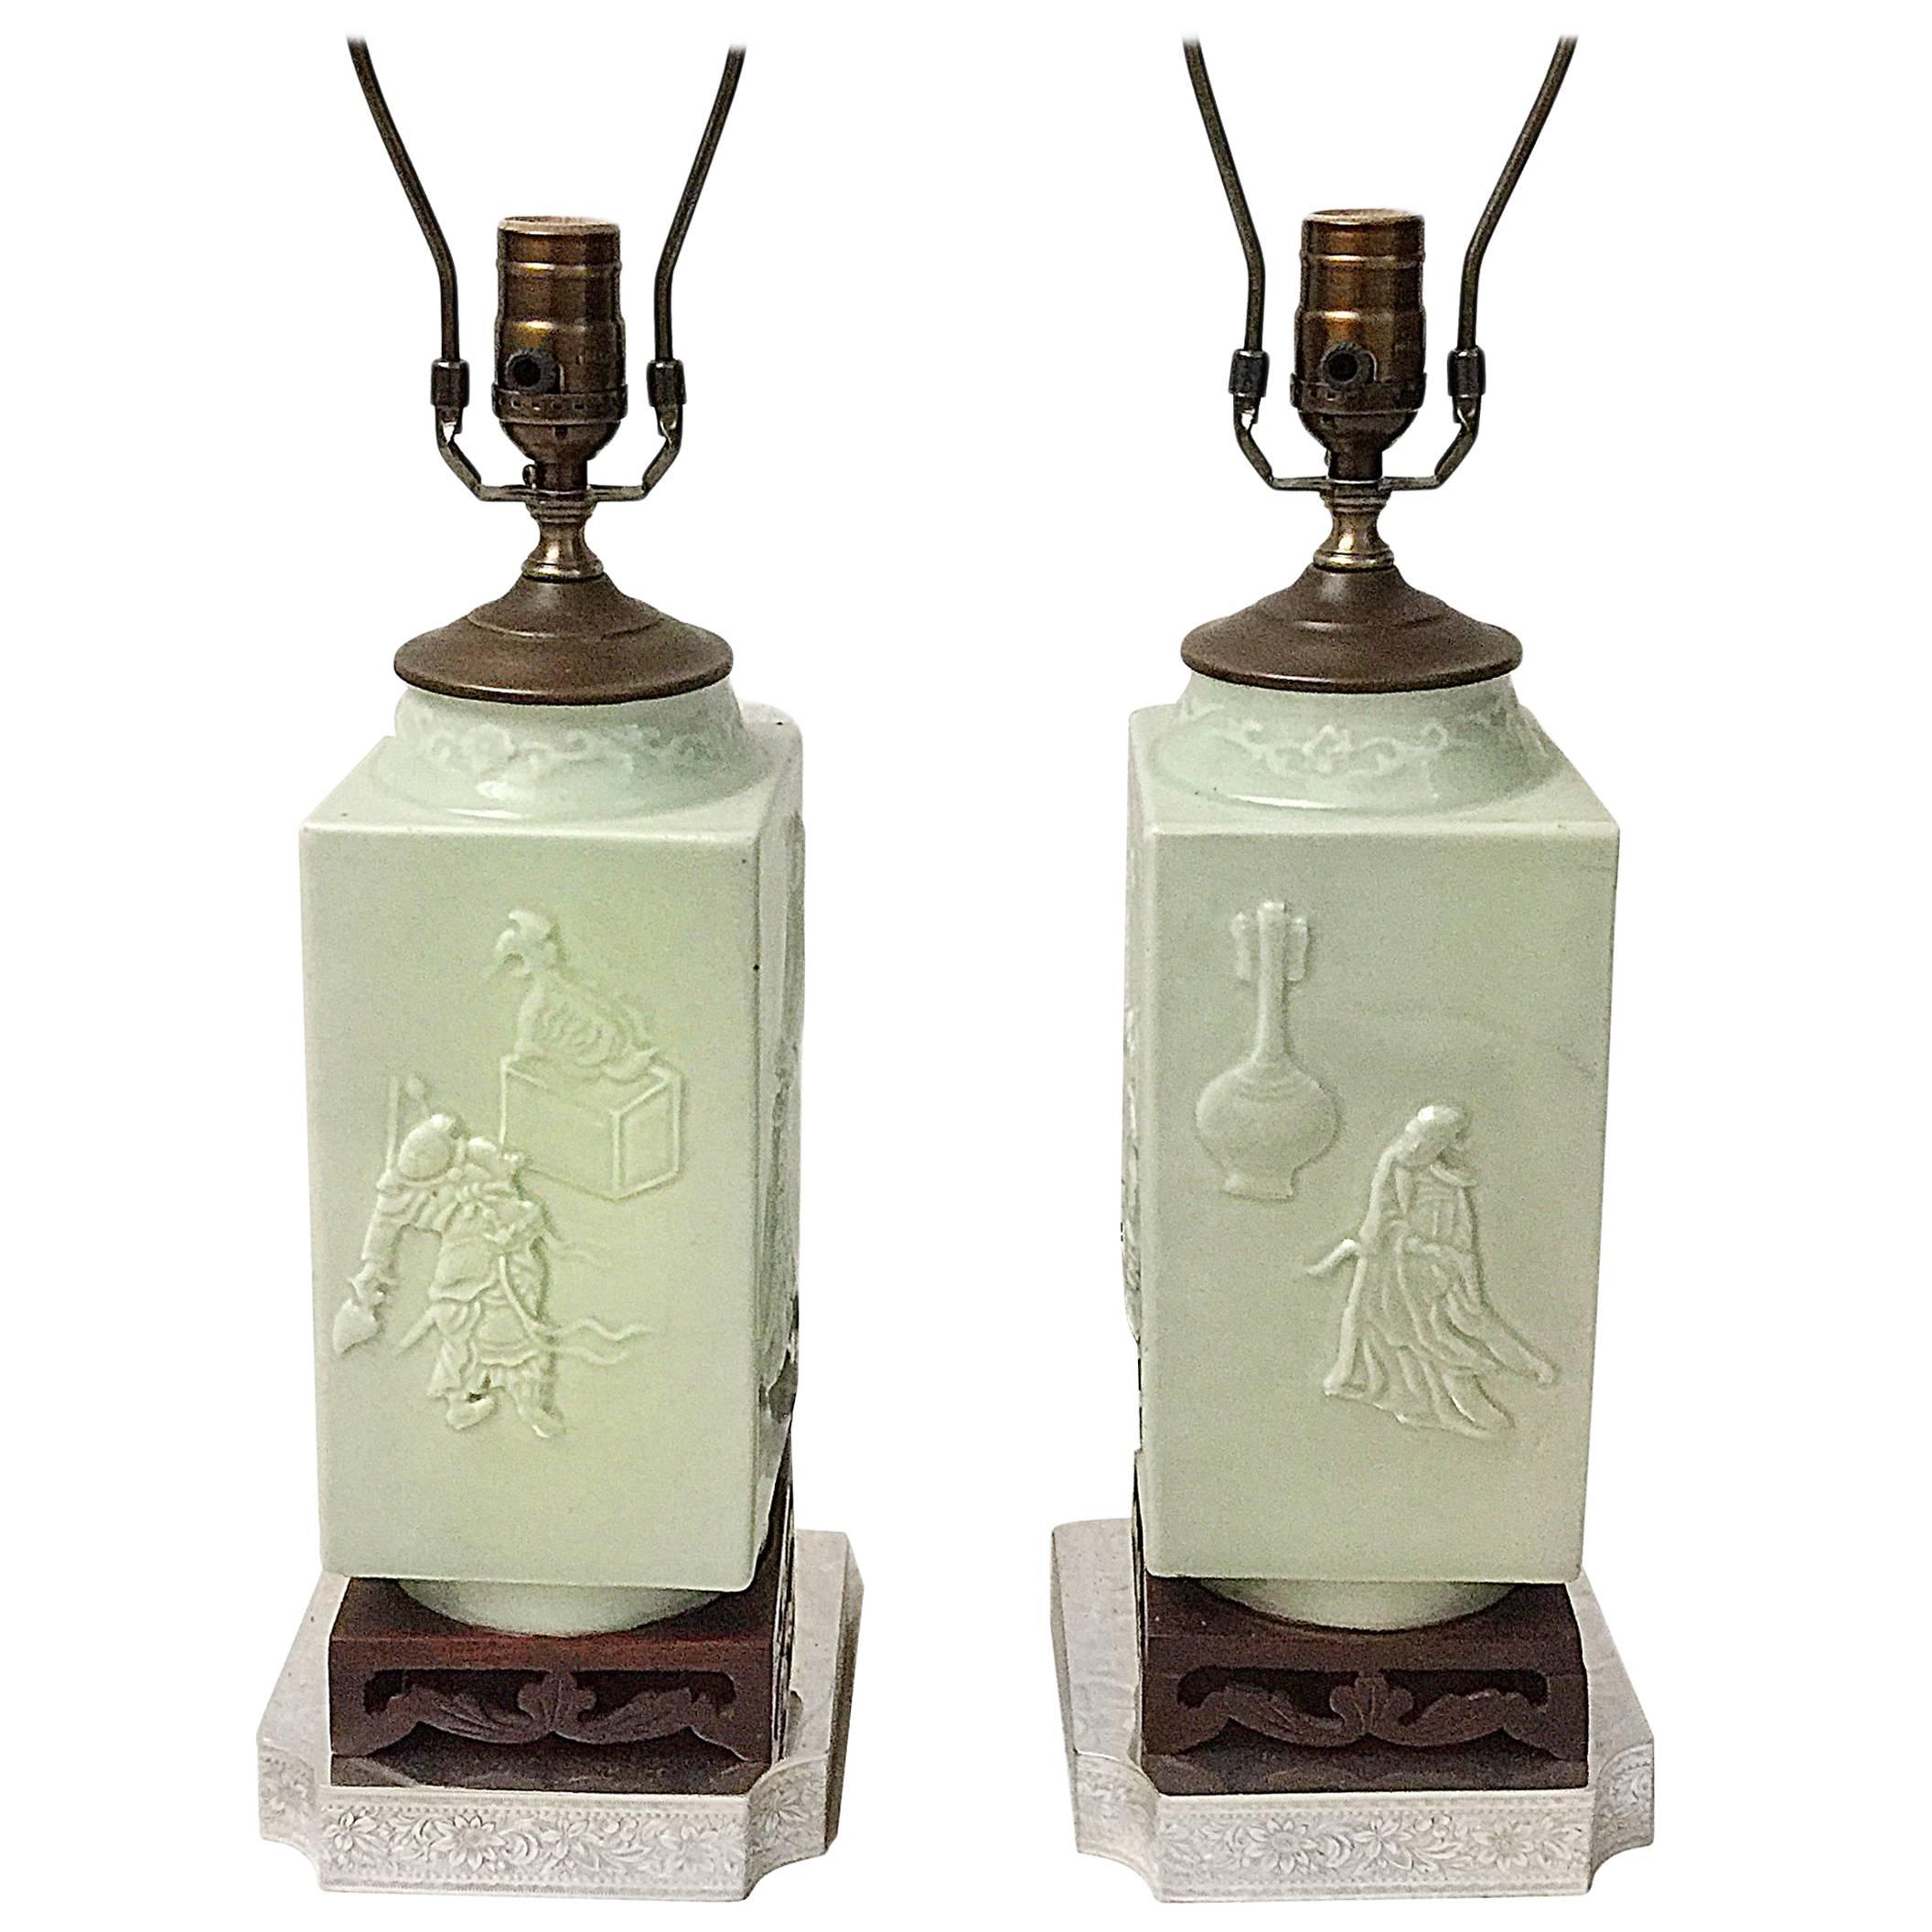 Pair of 1920s Chinese celadon lamps with court scenes, silver plated bases.

Measures: 15